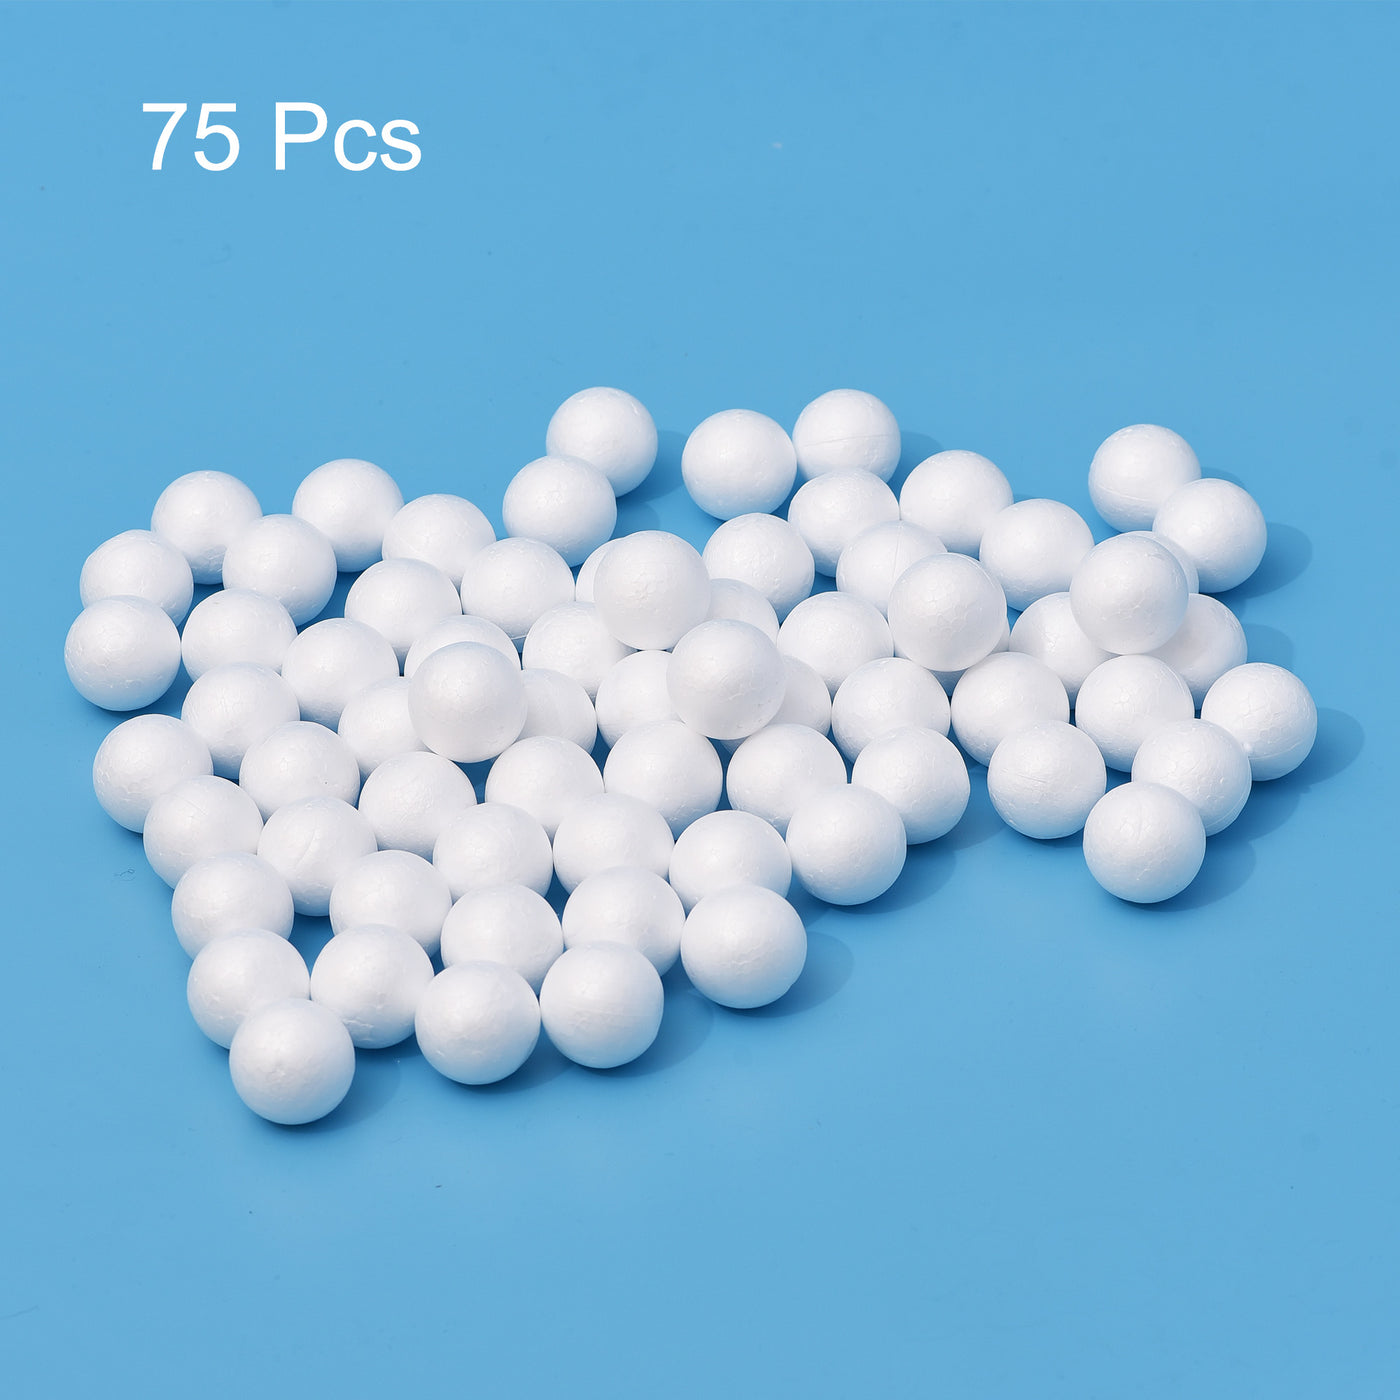 Uxcell Uxcell 75Pcs 1.5" White Polystyrene Foam Solid Balls for Crafts and Party Decorations